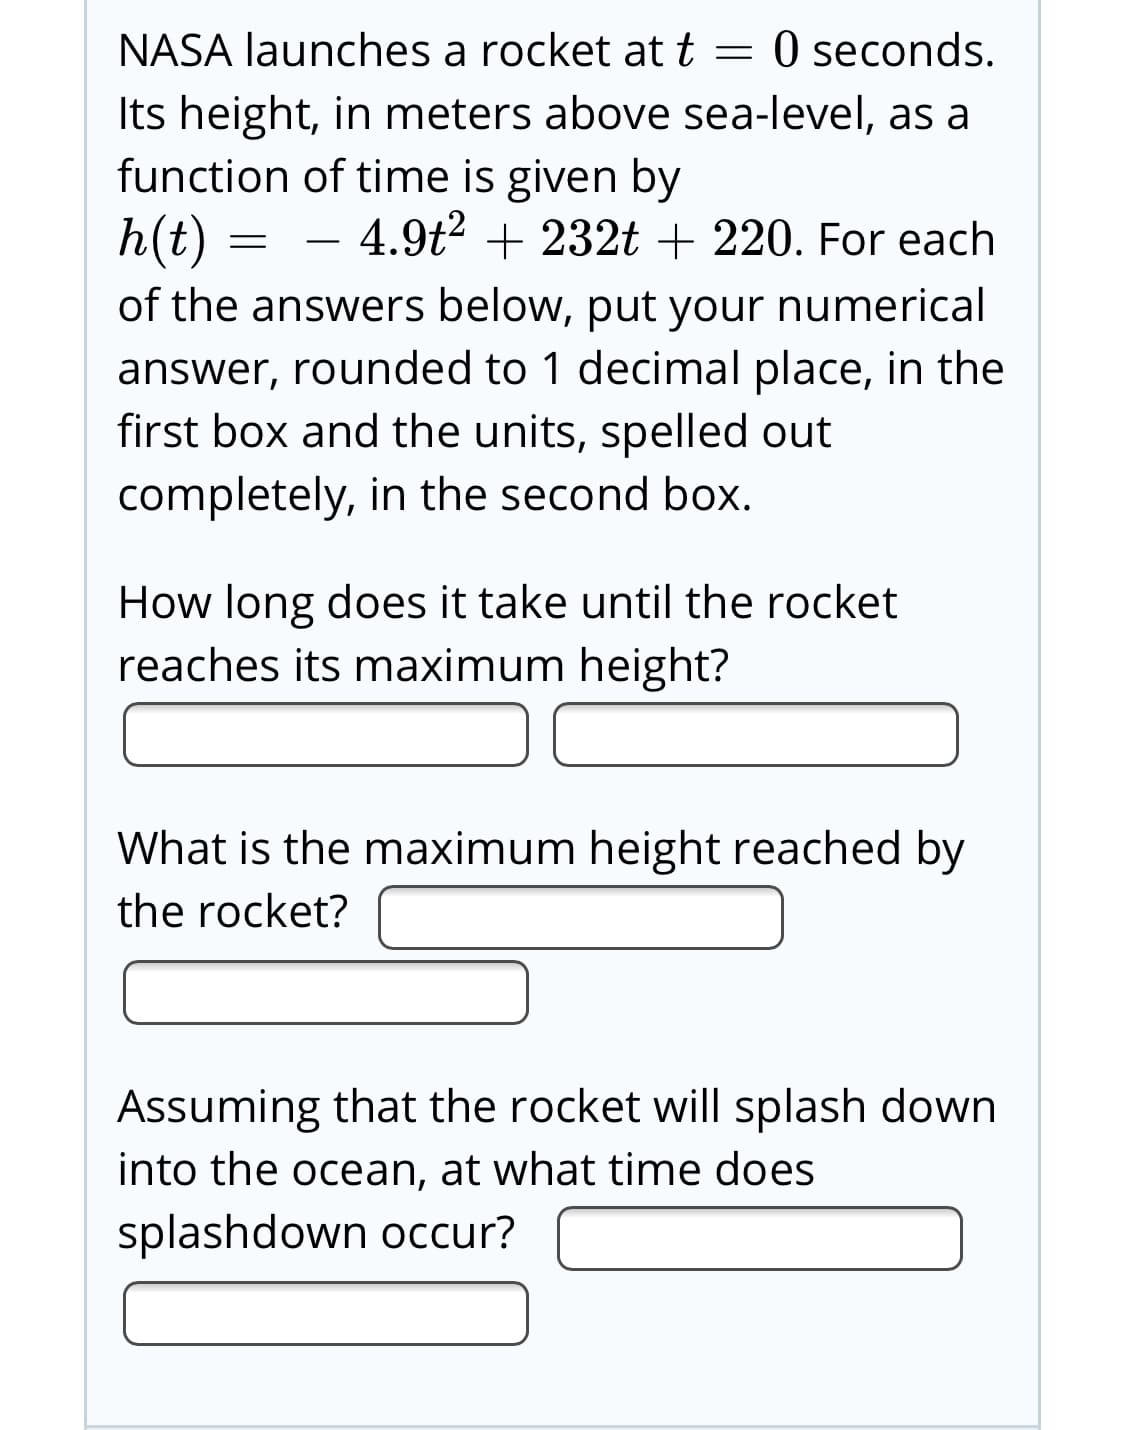 NASA launches a rocket att = 0 seconds.
Its height, in meters above sea-level, as a
function of time is given by
h(t) = -
4.9t2 + 232t + 220. For each
of the answers below, put your numerical
answer, rounded to 1 decimal place, in the
first box and the units, spelled out
completely, in the second box.
How long does it take until the rocket
reaches its maximum height?
What is the maximum height reached by
the rocket?
Assuming that the rocket will splash down
into the ocean, at what time does
splashdown occur?
